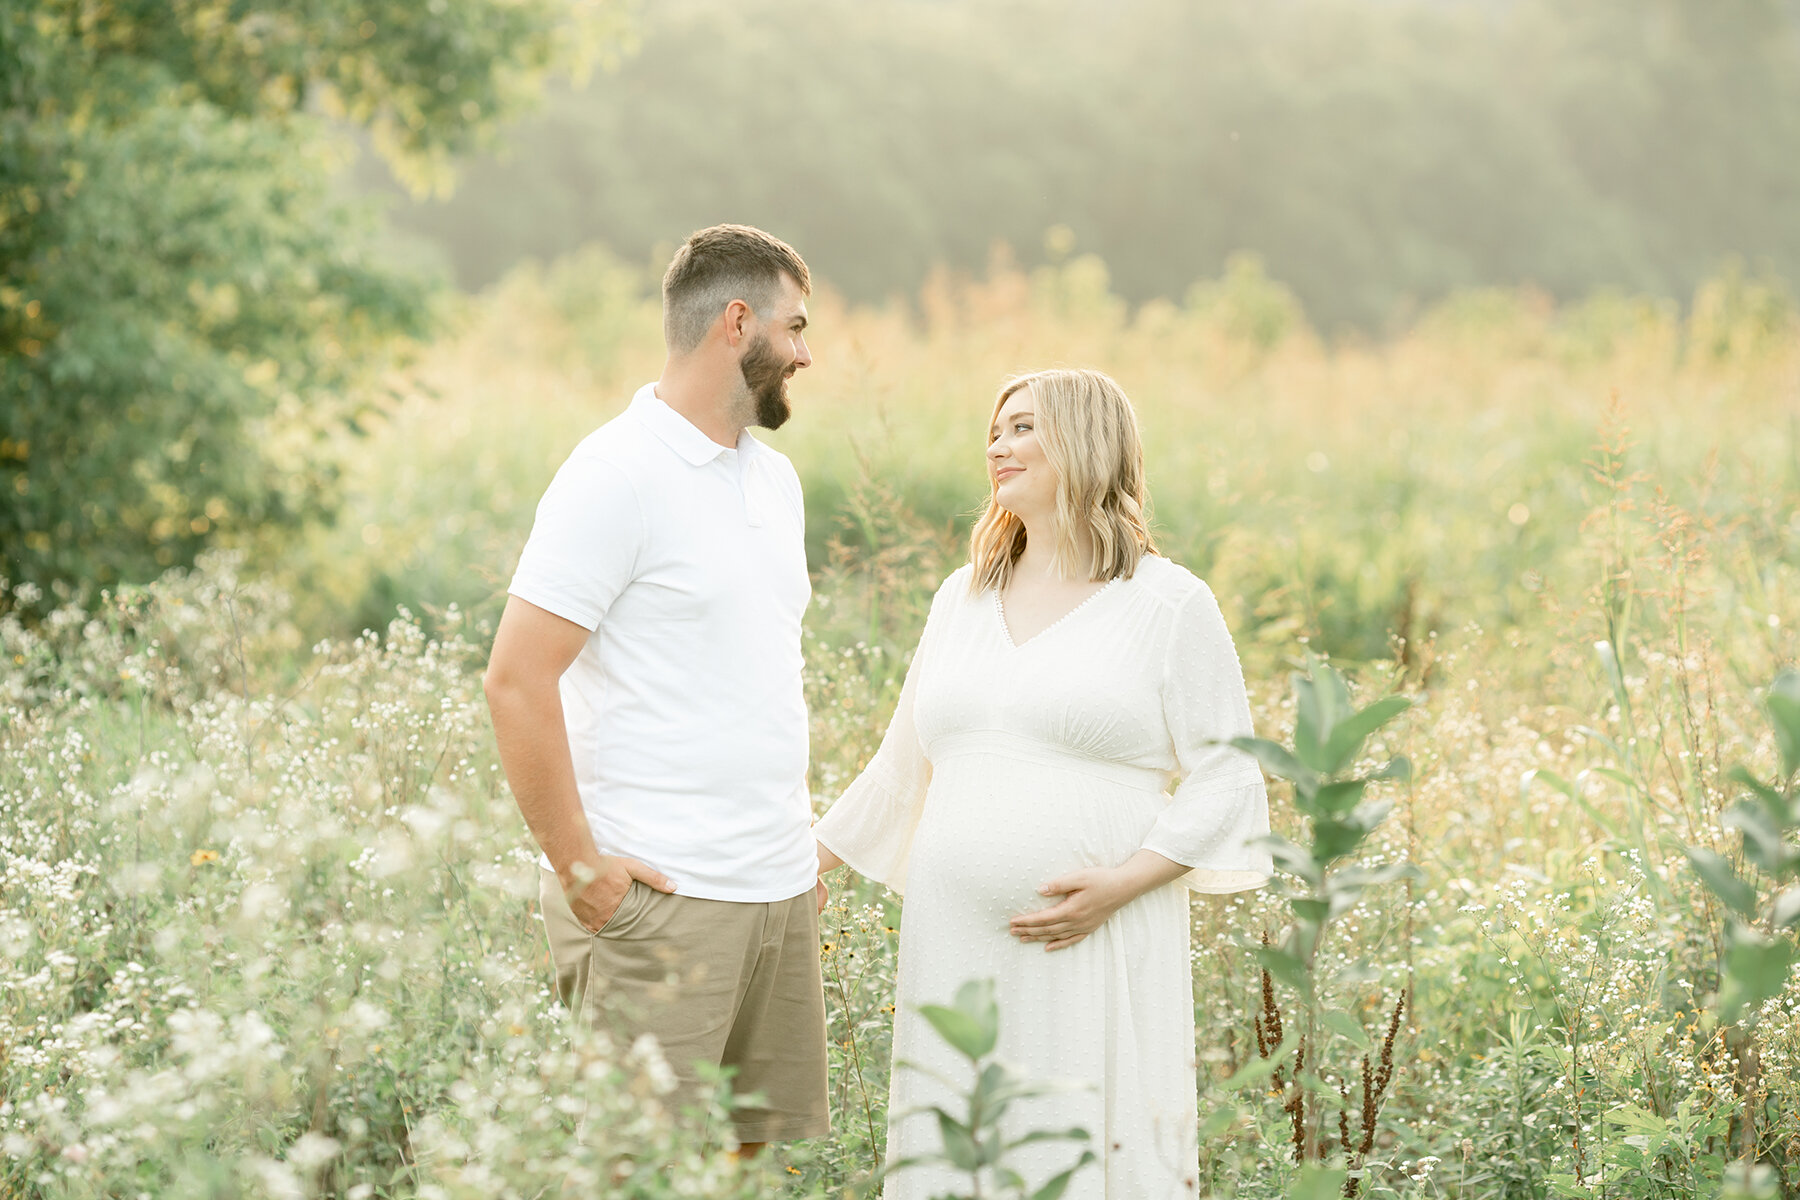 Outdoor maternity photo shoot in field with flowers. Light and airy Louisville KY photographer. Julie Brock Photography